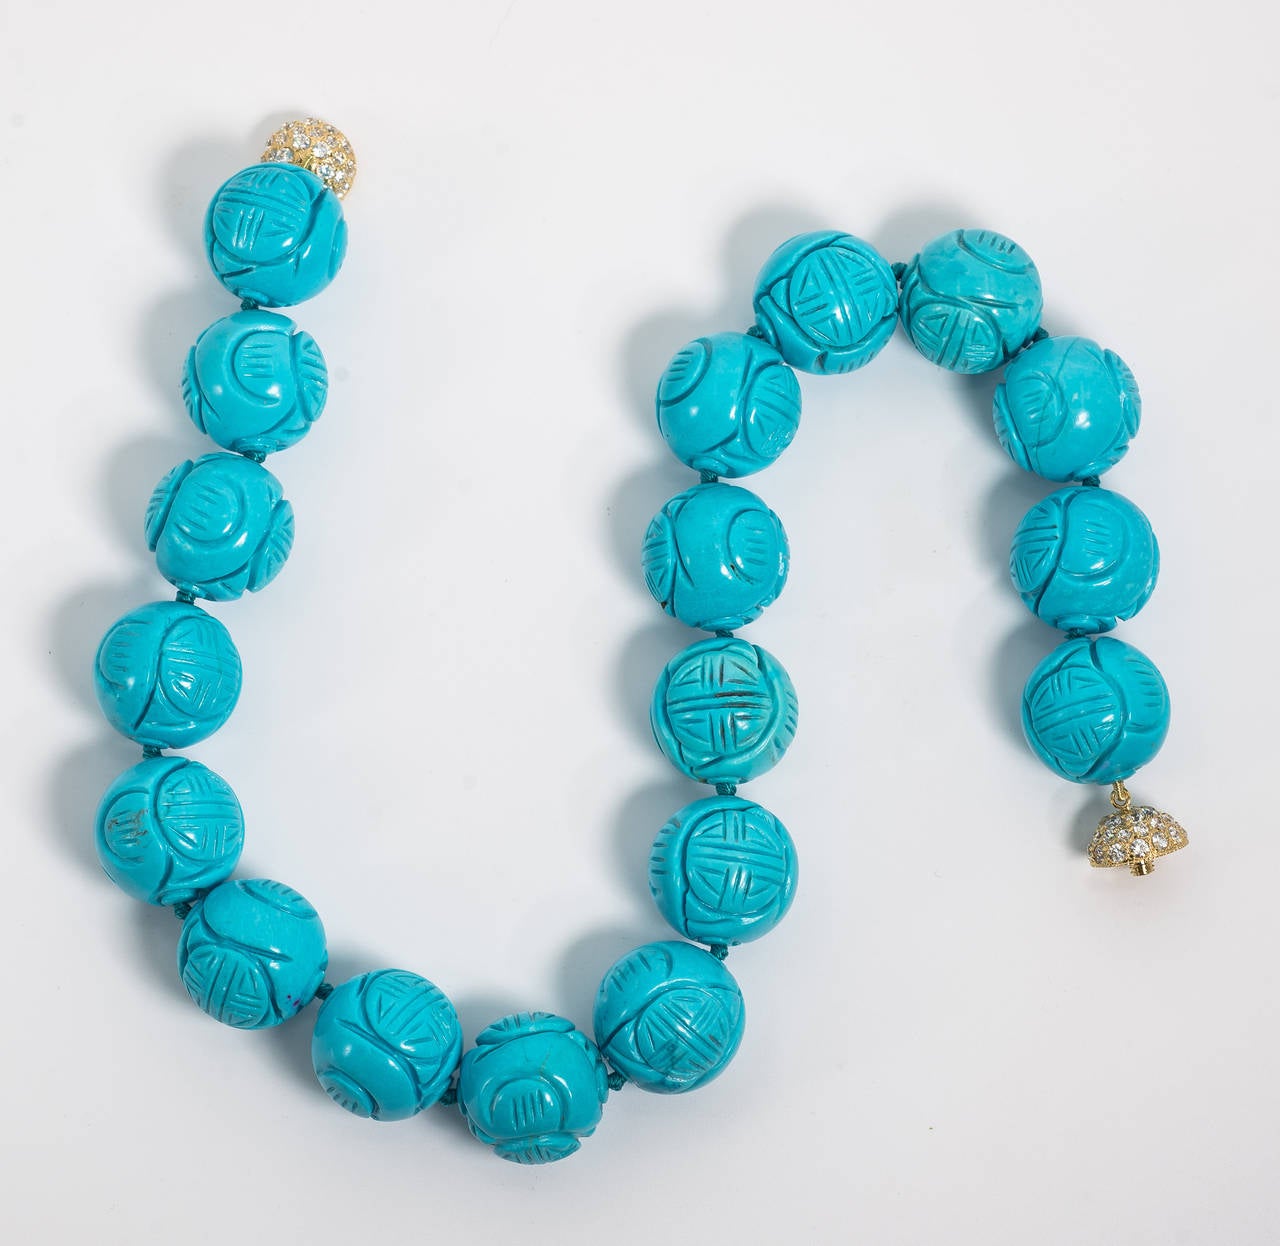 Fabulous large Faux Chinese Good Luck  turquoise 20mm bead necklace hand strung on turquoise silk attached to a pave Cubic Zircon ball clasp. Necklace measures 18'' long. Wonderful color beads.